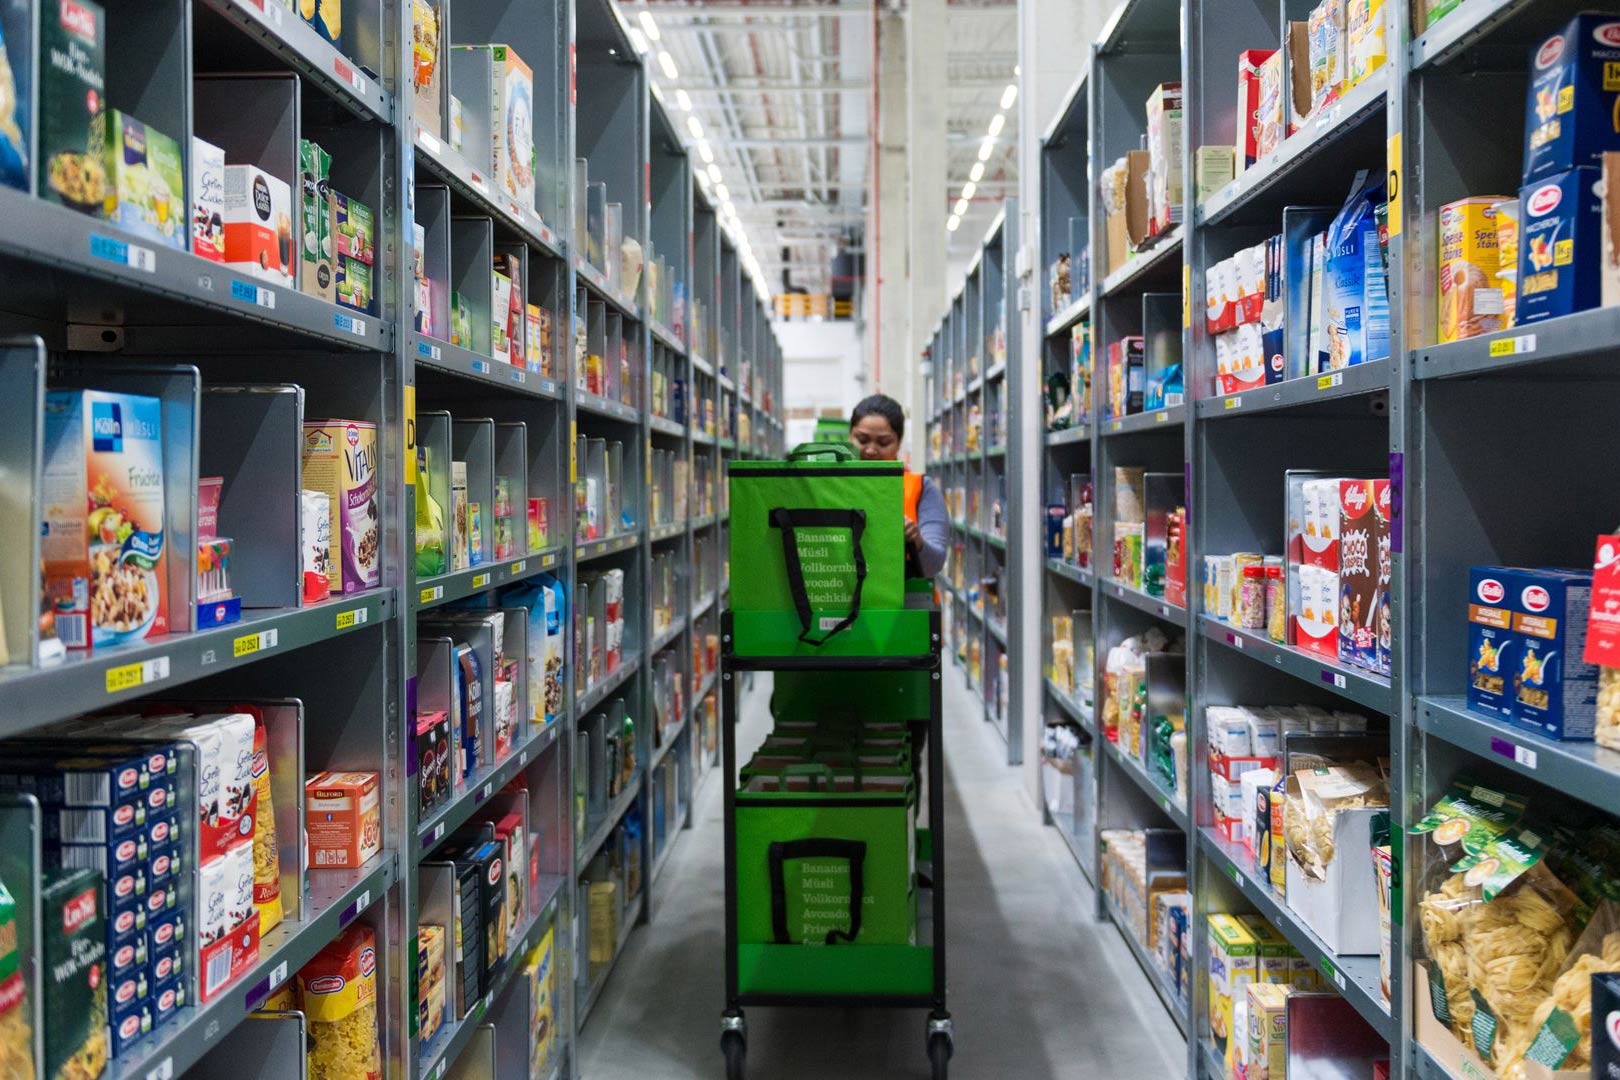 Working putting together orders in Amazon Fresh Warehouse